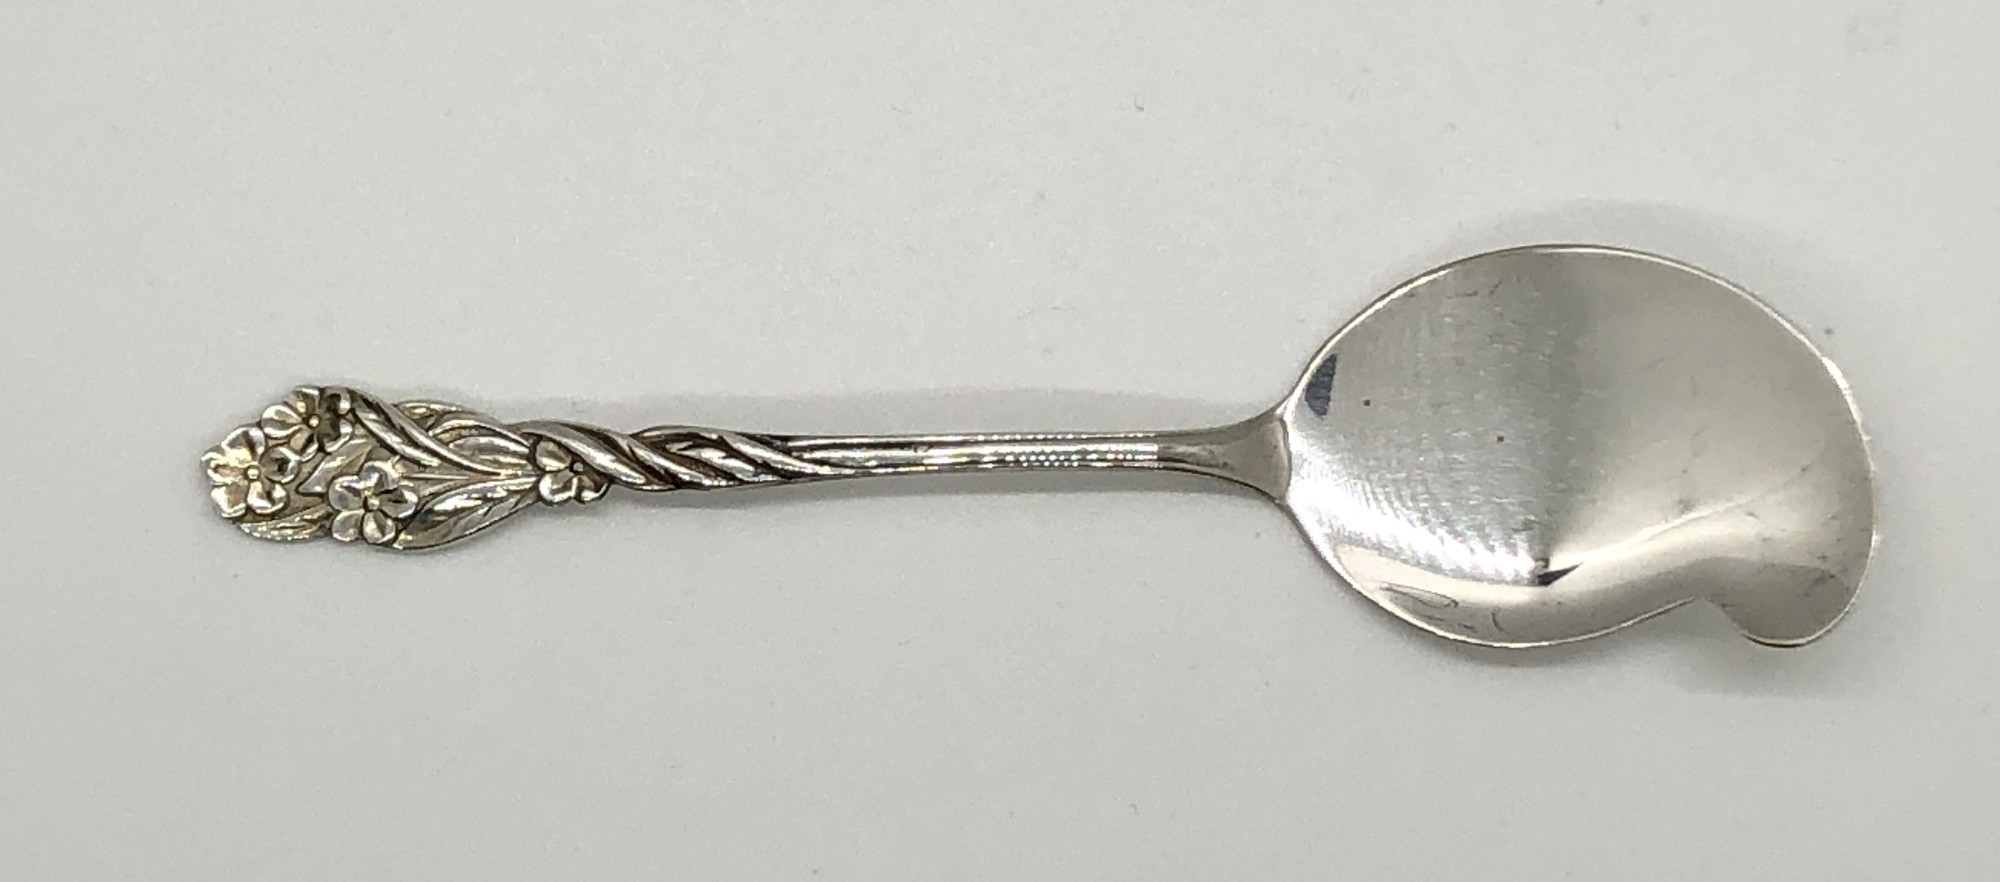 For that friend who has everything, but they don't have an antique sterling silver Jelly Server c.1920s!
4 1/2in
Will ship priority mail.